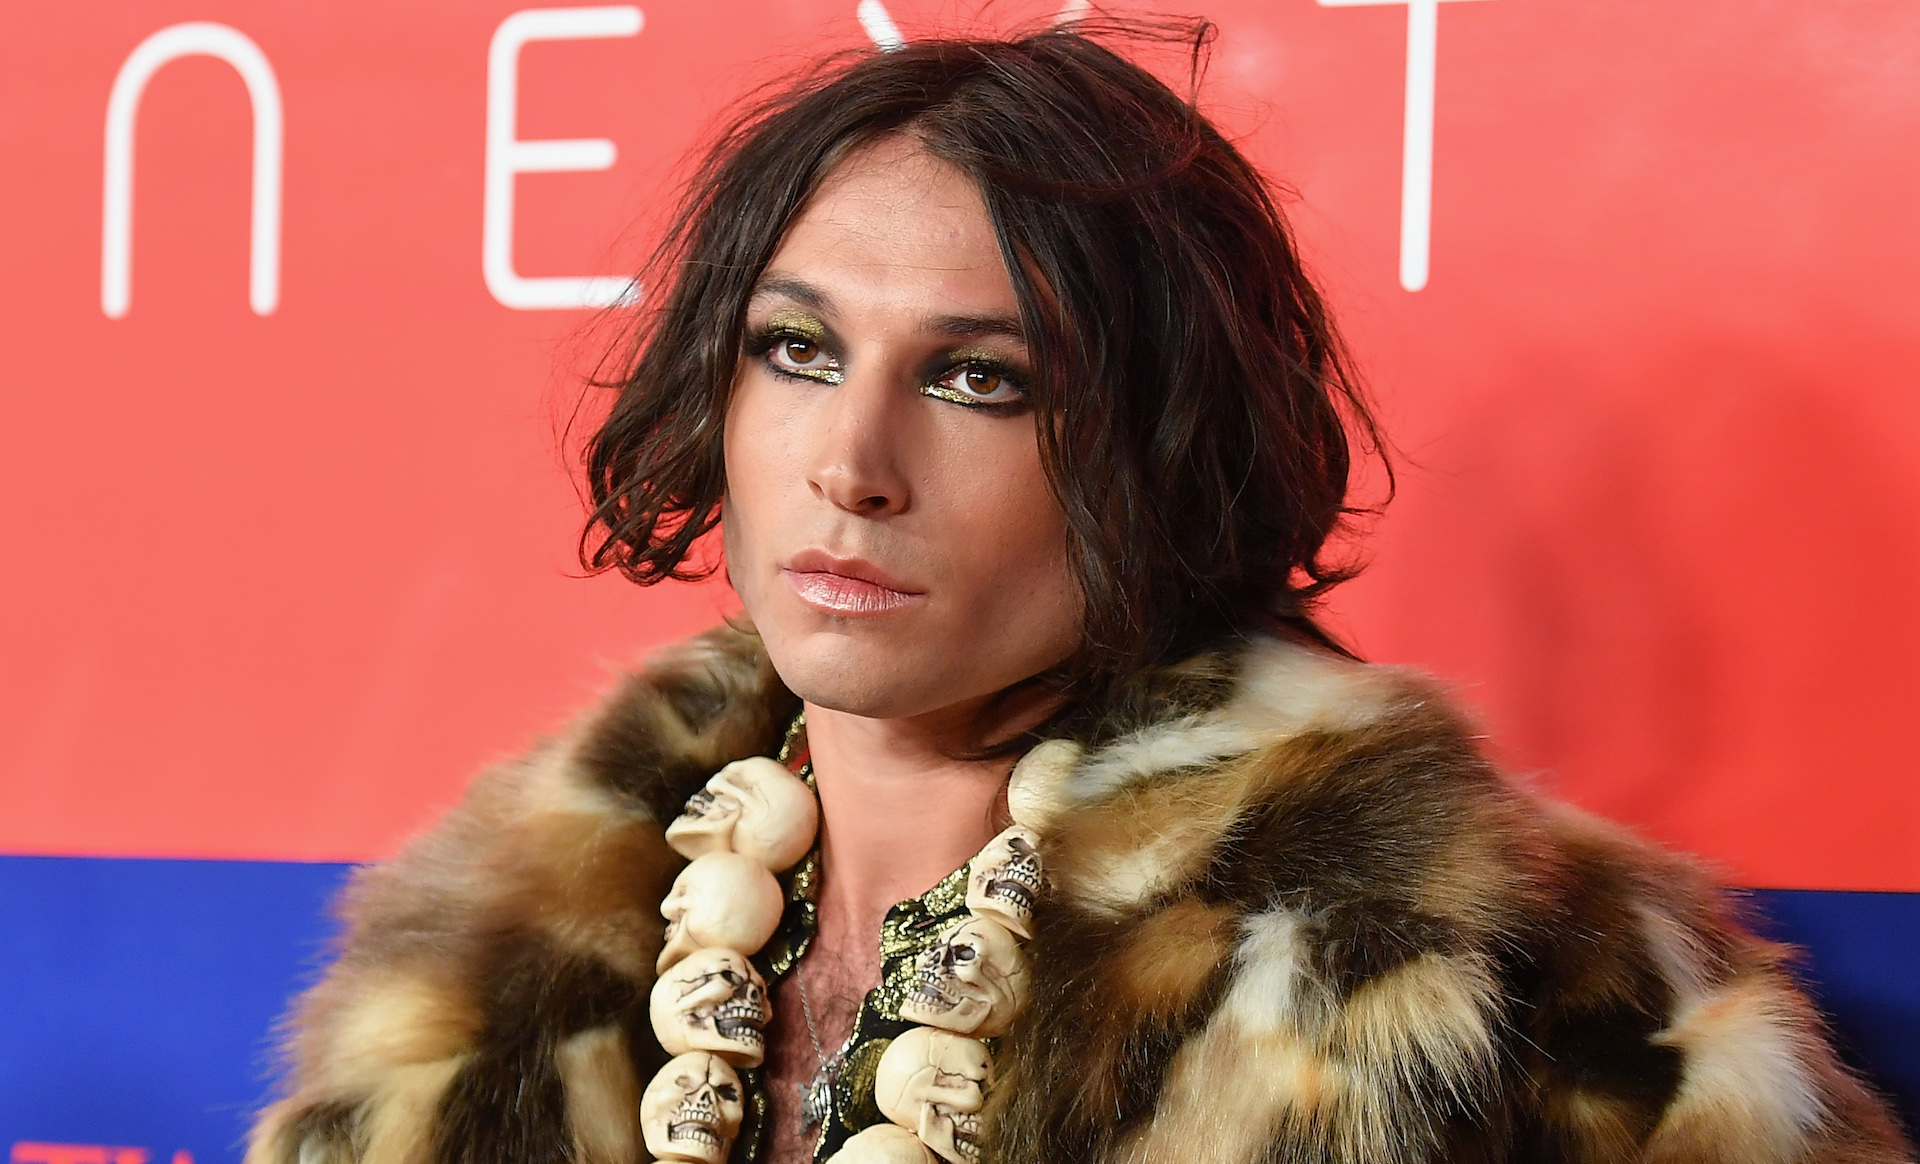 &#x27;The Flash&#x27; star Ezra Miller on red carpet for premiere